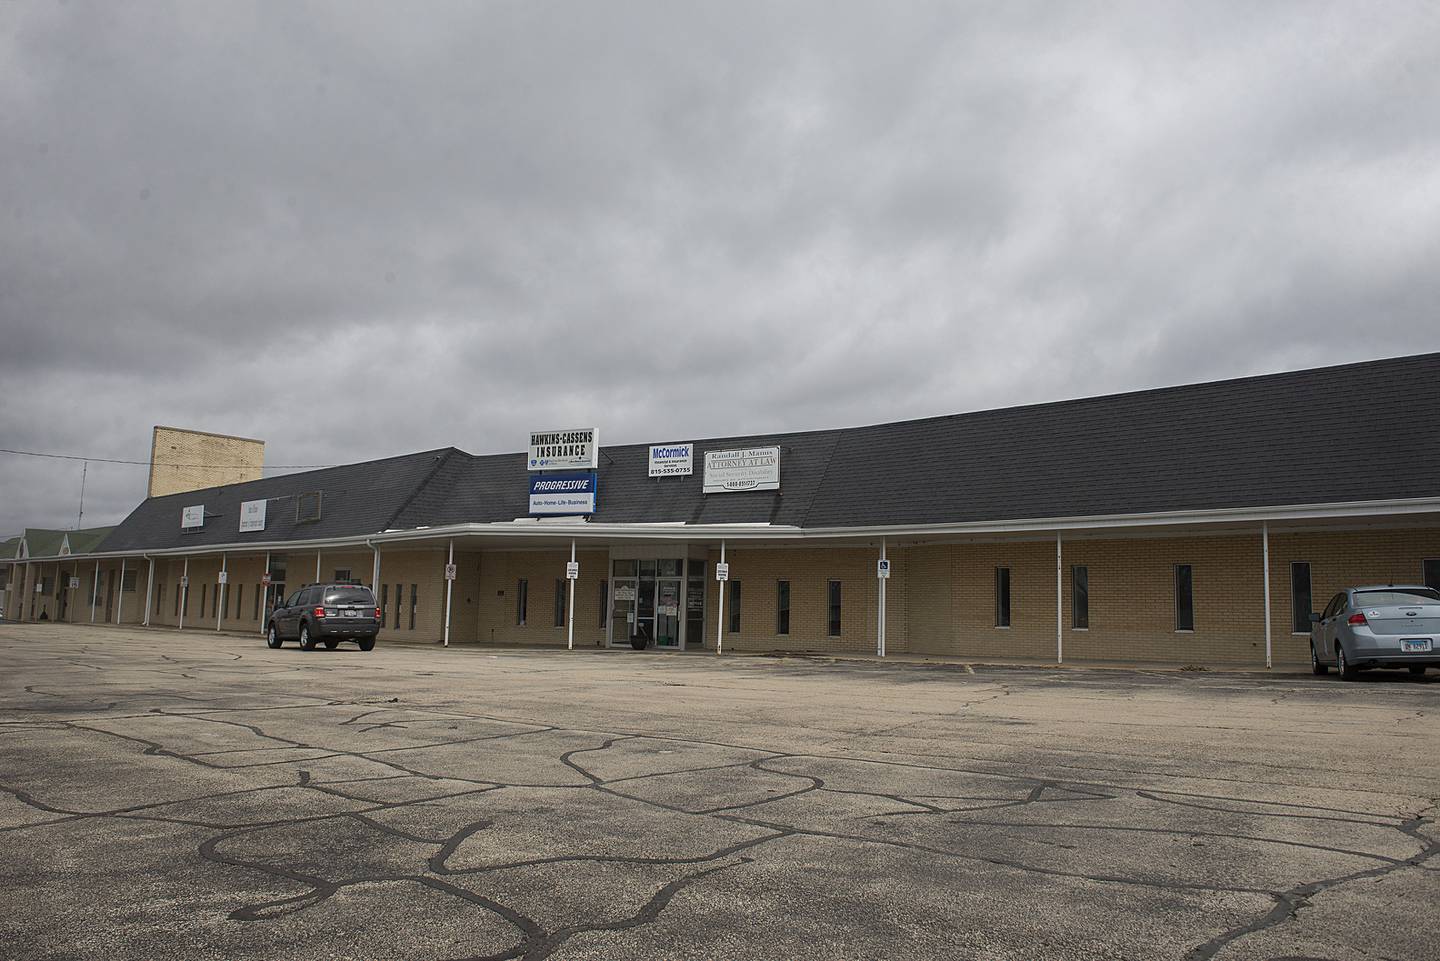 The 41,000-sqaure-foot Lee Wayne Plaza, just west of Paone’s Blackhawk Lanes, has roughly 35,000 square feet ready to rent, in 200- to 15,000-square-foot spaces.